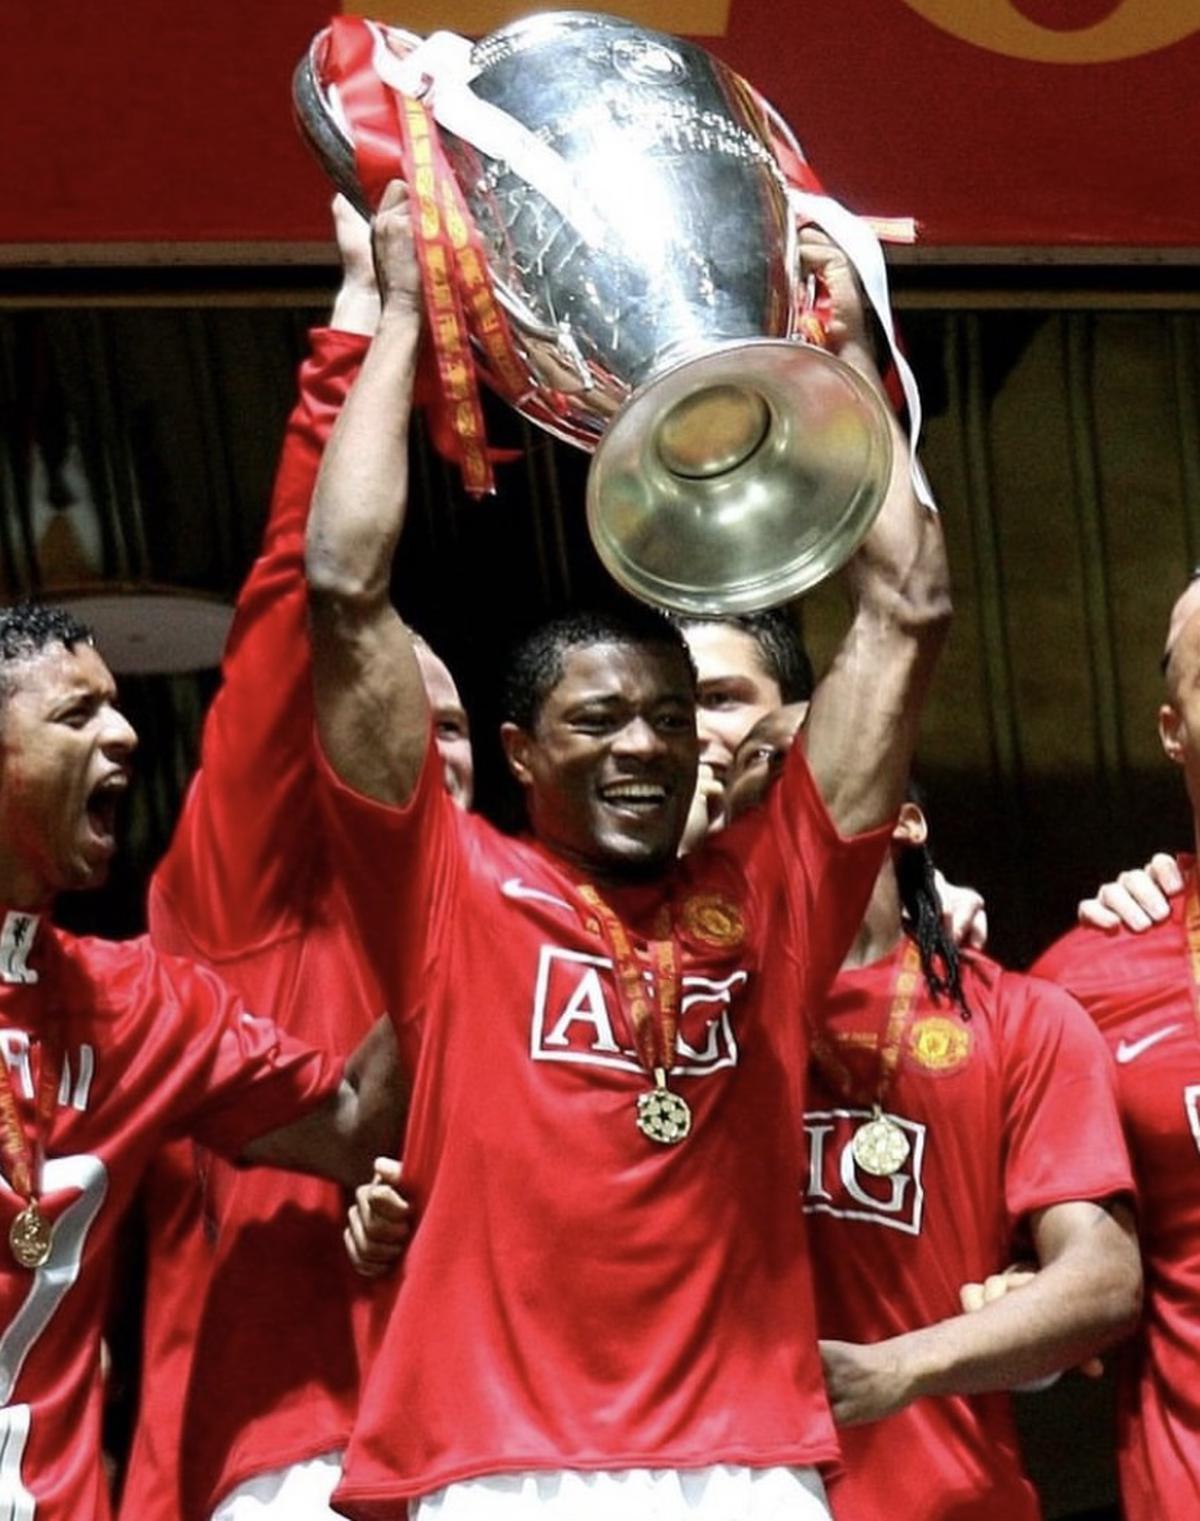 Patrice Evra won a glut of trophies during his time at Manchester United, cementing his status as one of Europe’s best left-backs